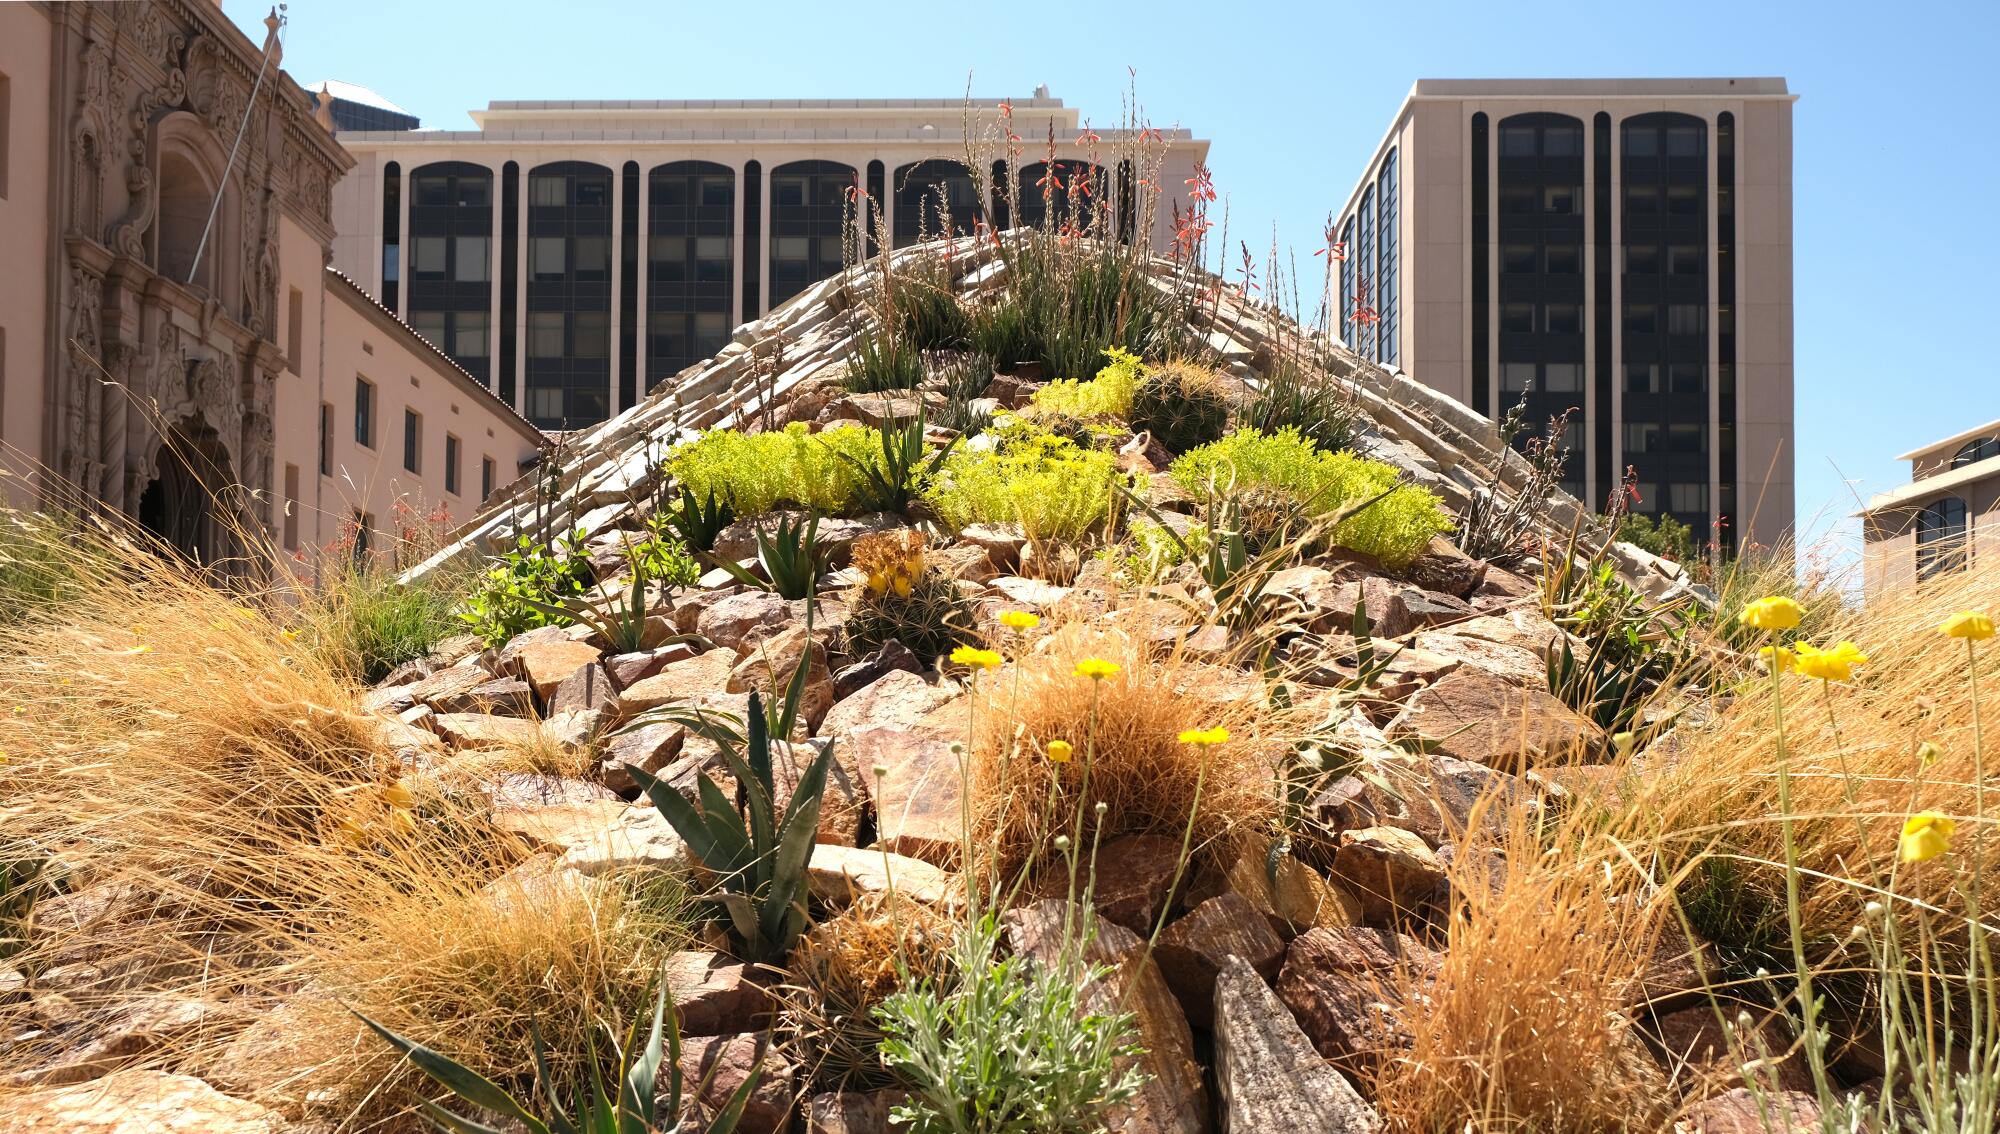 A berm made of quartzite rock features a riot of flowering plants, grasses and aloes.